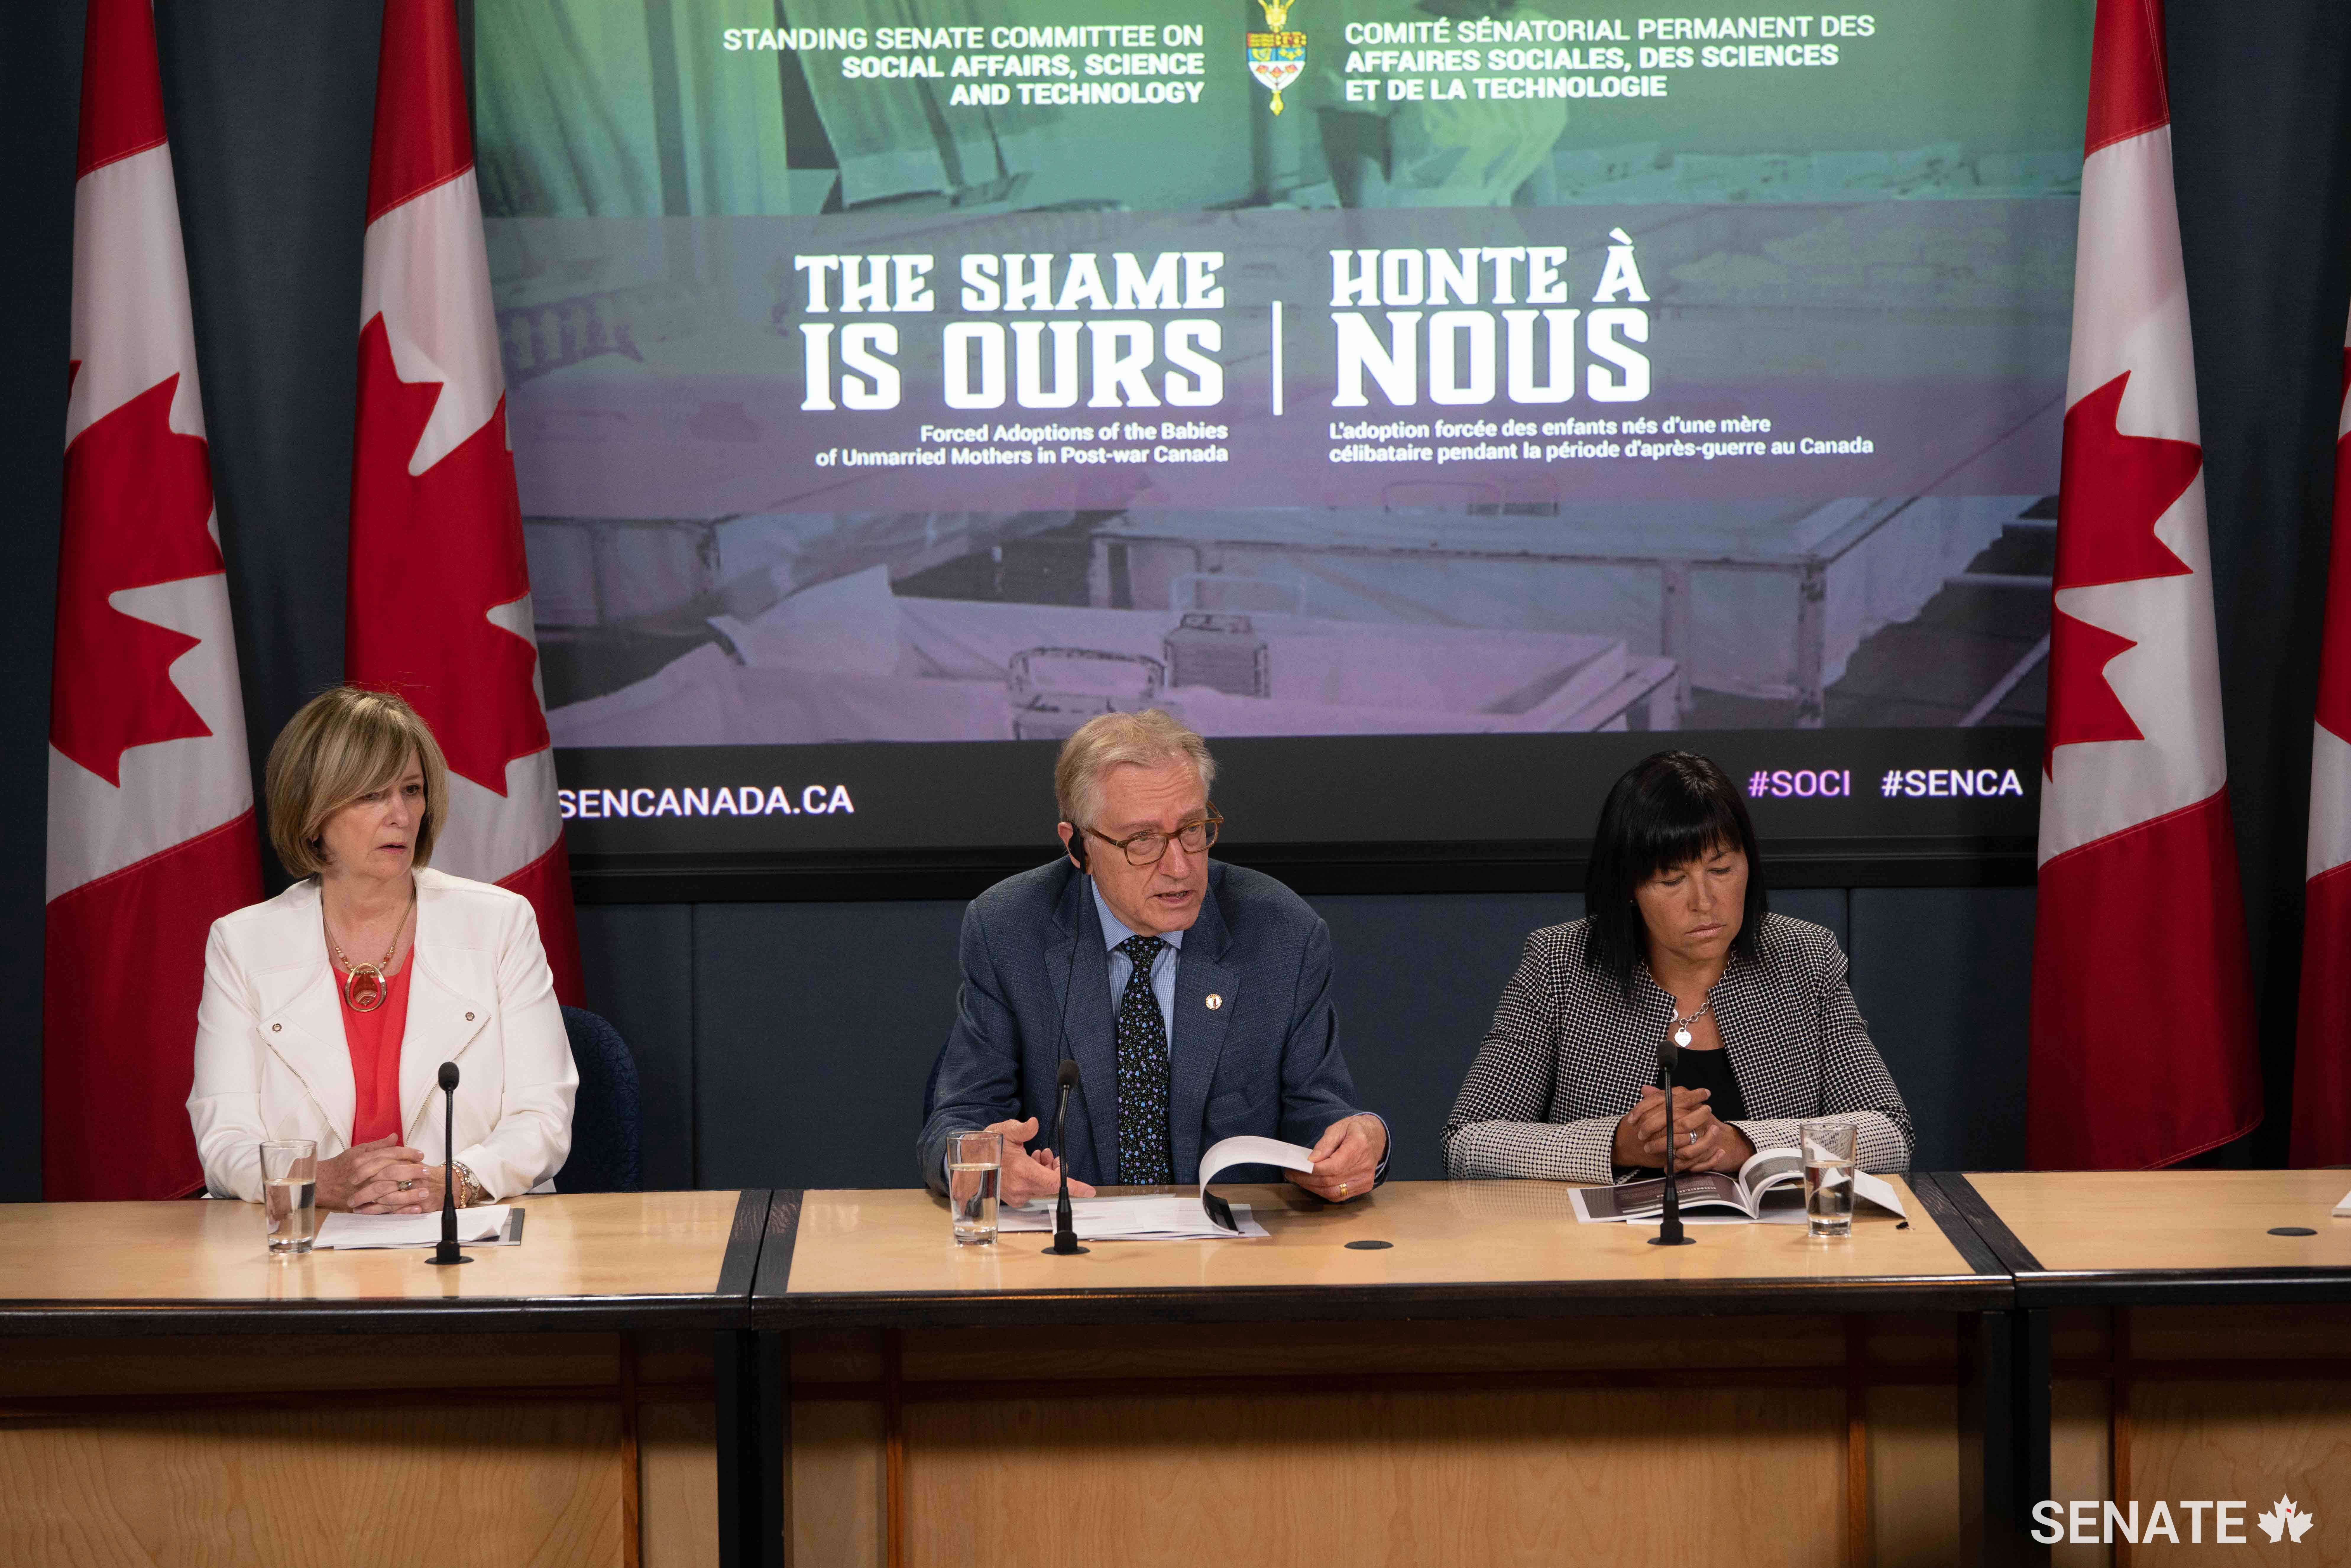 From left: Origins Canada executive director Valerie Andrews joins members of the Senate Committee on Social Affairs, Science and Technology — the Hon. Art Eggleton, a former senator, and Senator Chantal Petitclerc — at a press conference on July 19, 2018. The committee released a report on the post-war practice of forced adoptions of babies of unmarried mothers in Canada.